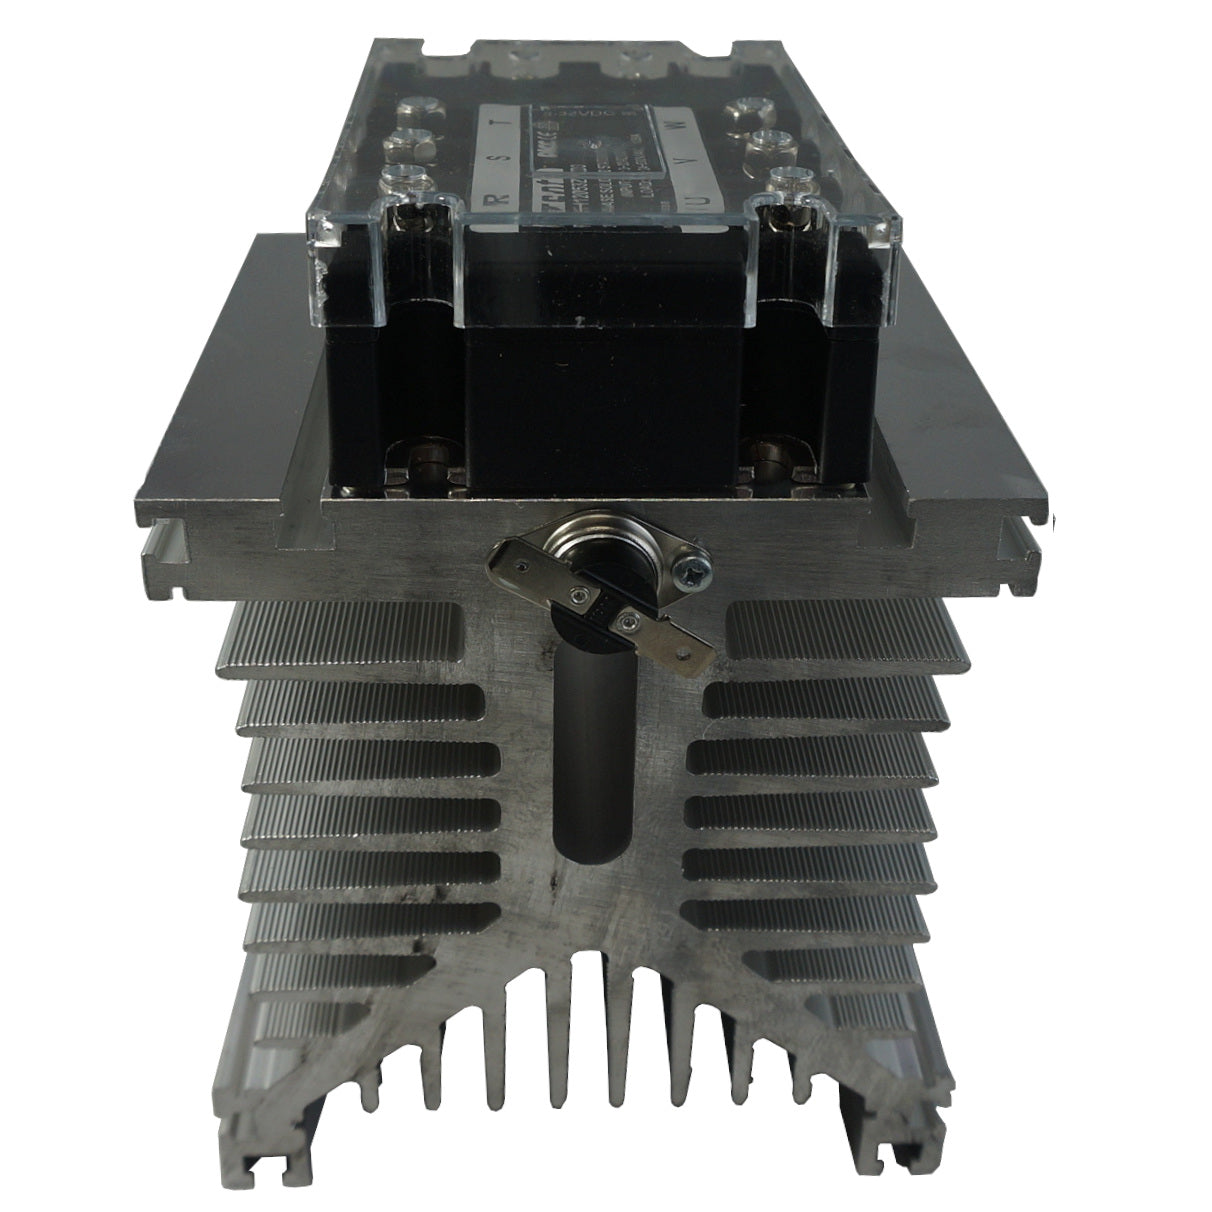 H31/110M-T, Heatsink 110mm, Milled, Drilled and Tapped for 3 Phase SSR with Thermal Overload, 0.5°C/Watt